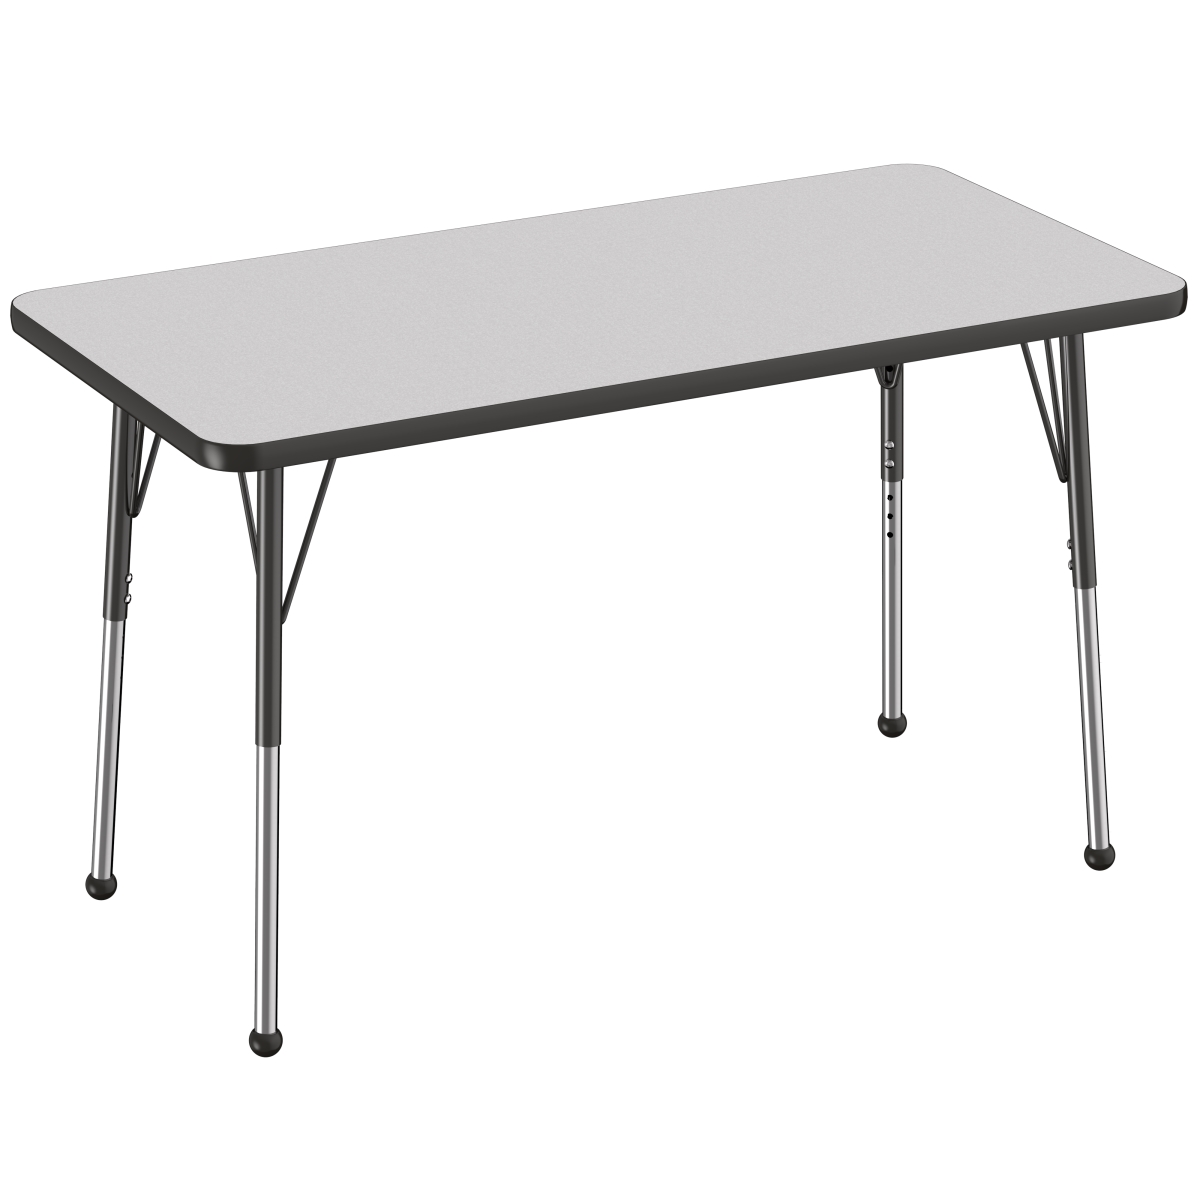 10008-gybk 24 X 48 In. Rectangle T-mold Adjustable Activity Table With Standard Ball - Grey & Black